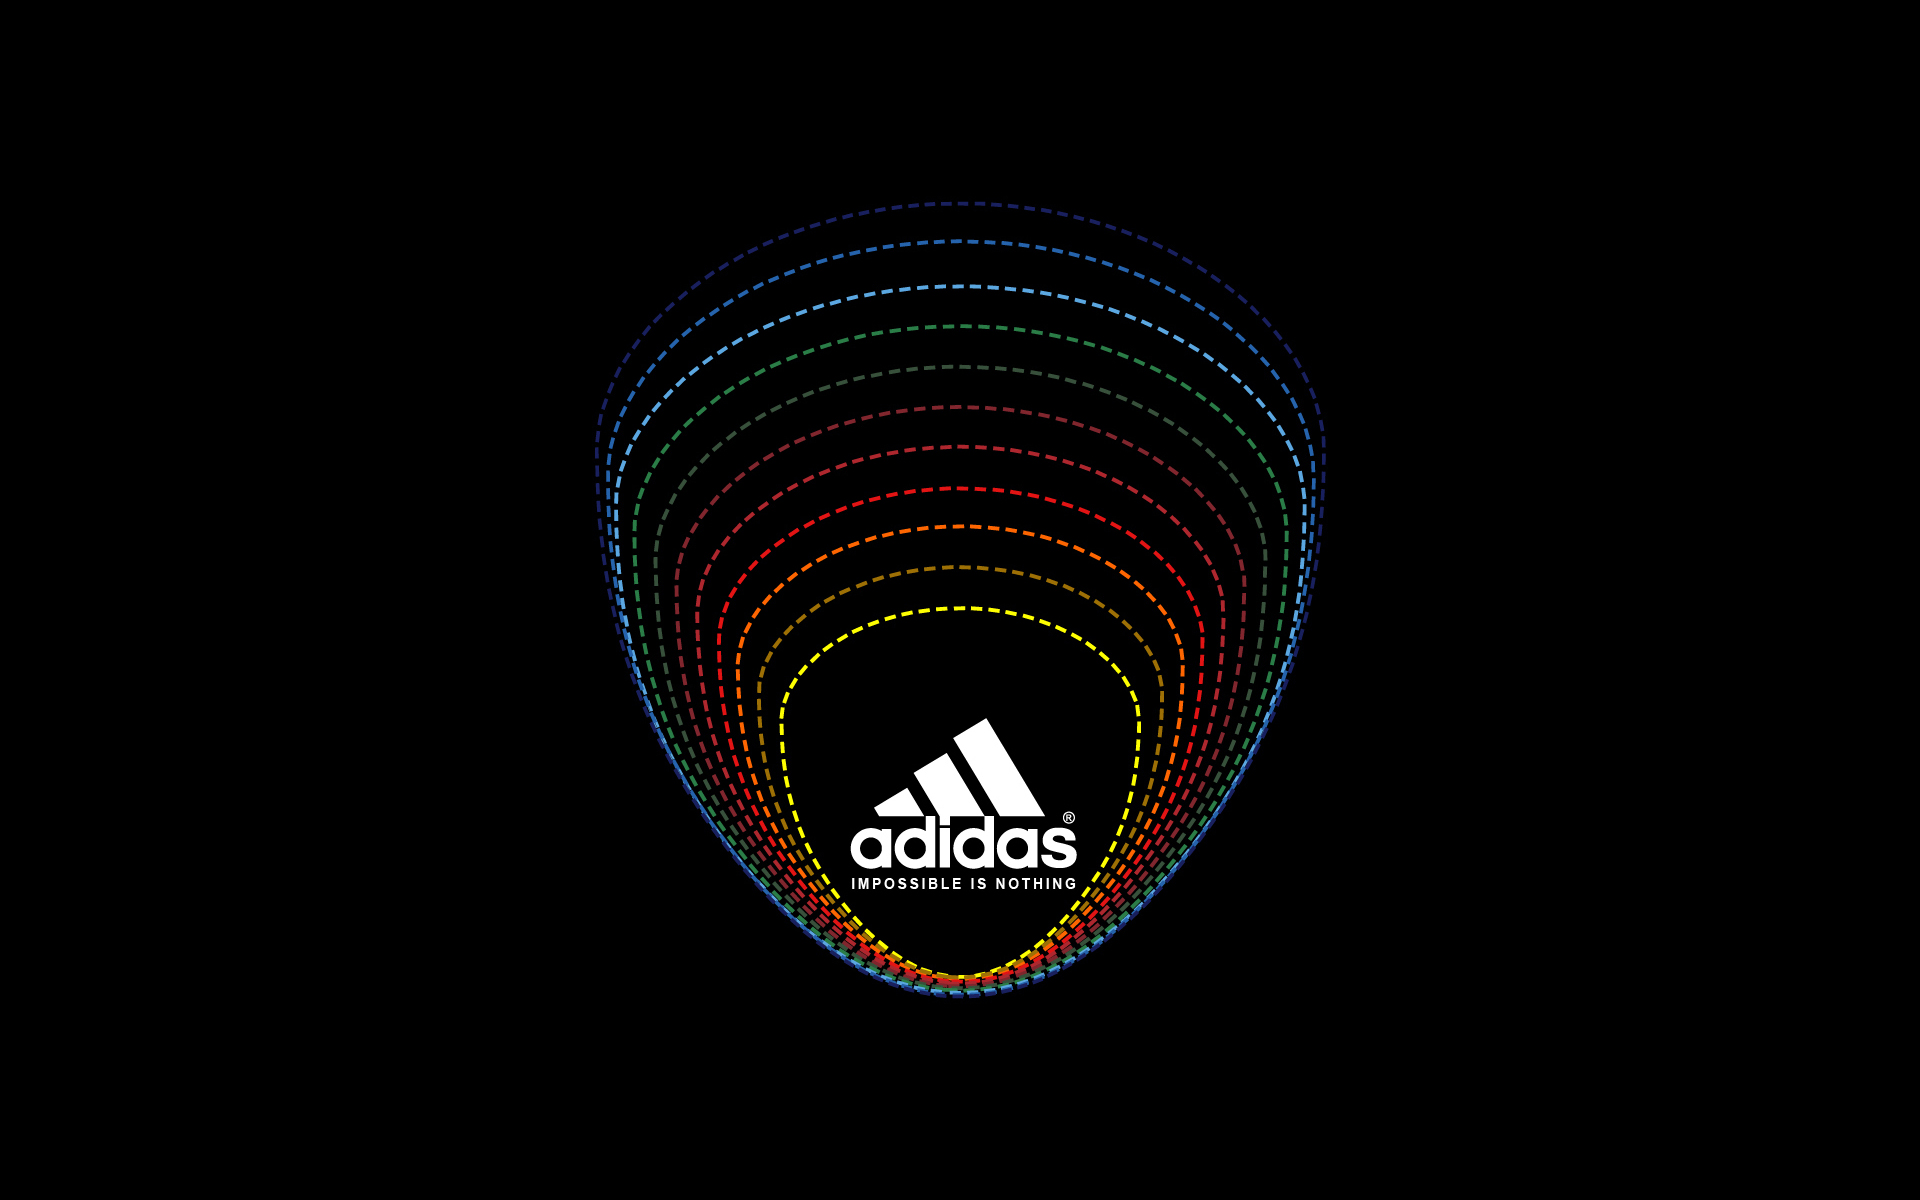 Wallpaper Adidas Impossible Is Nothing